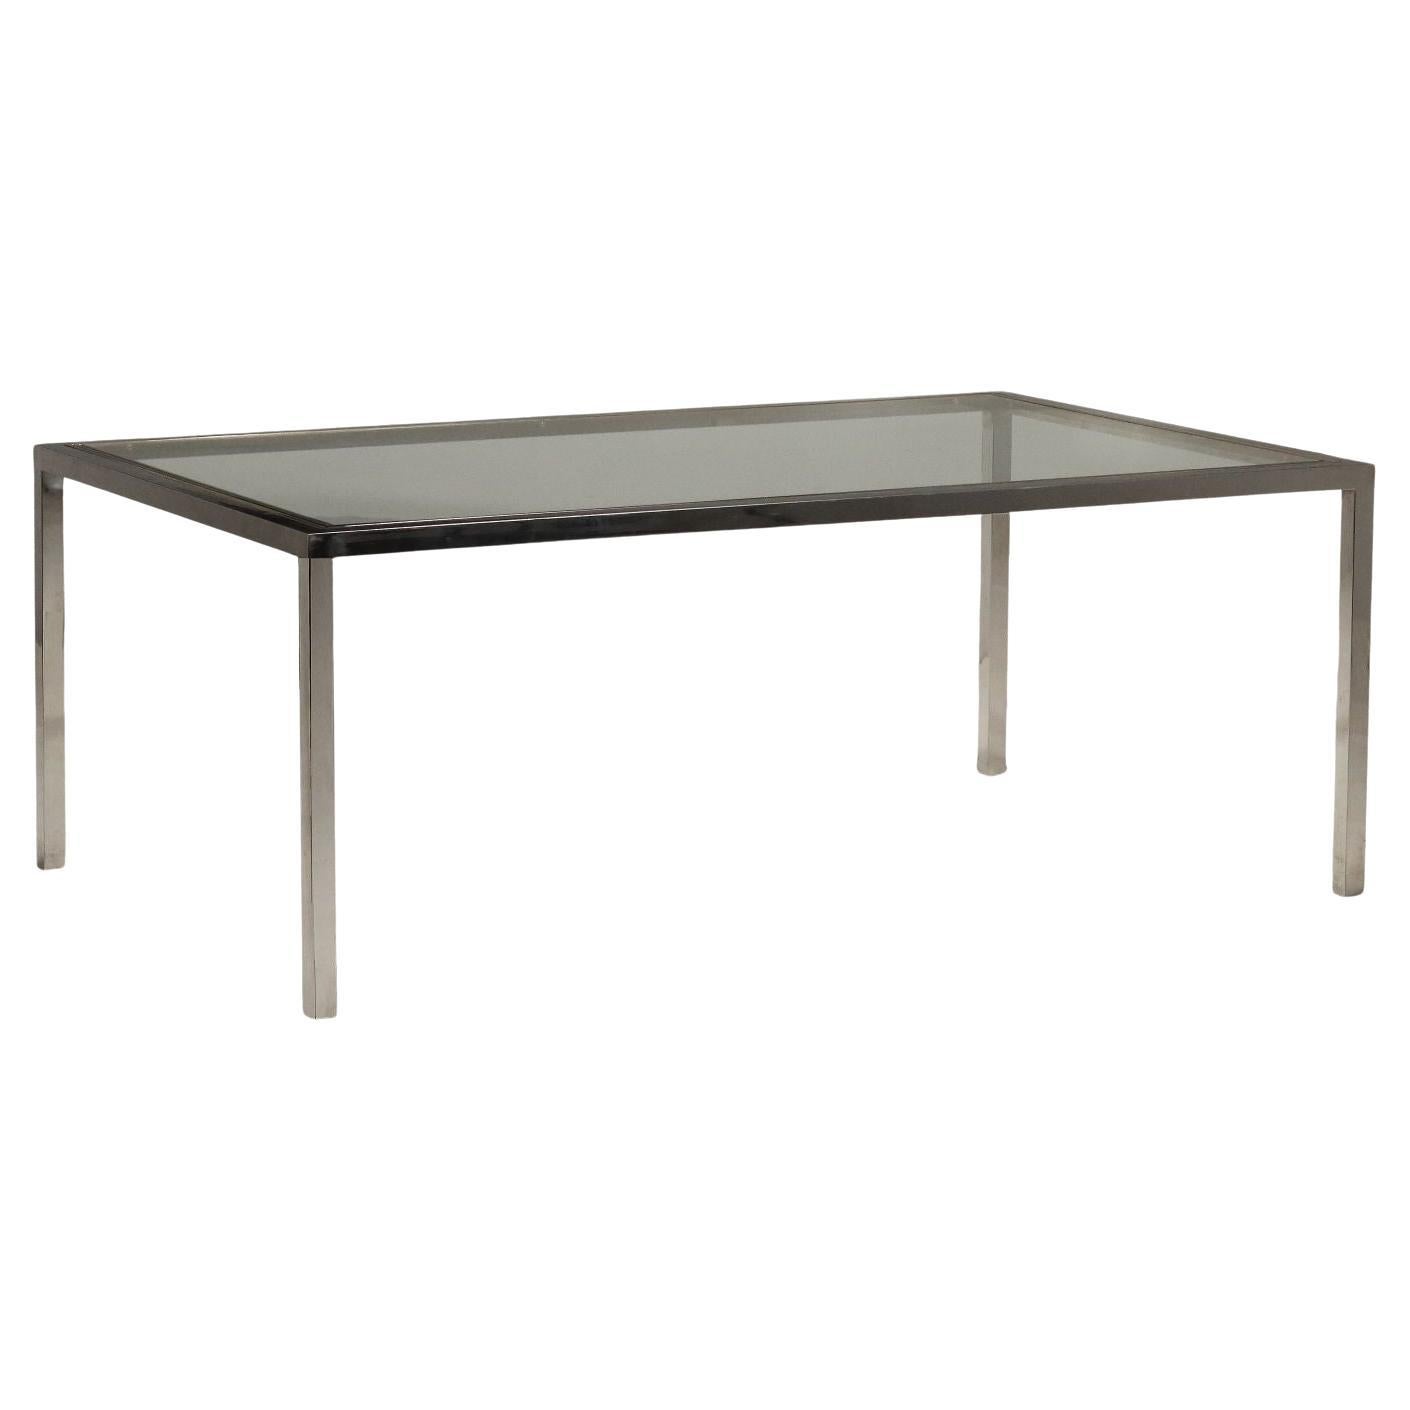 70s steel and glass rectangular table For Sale